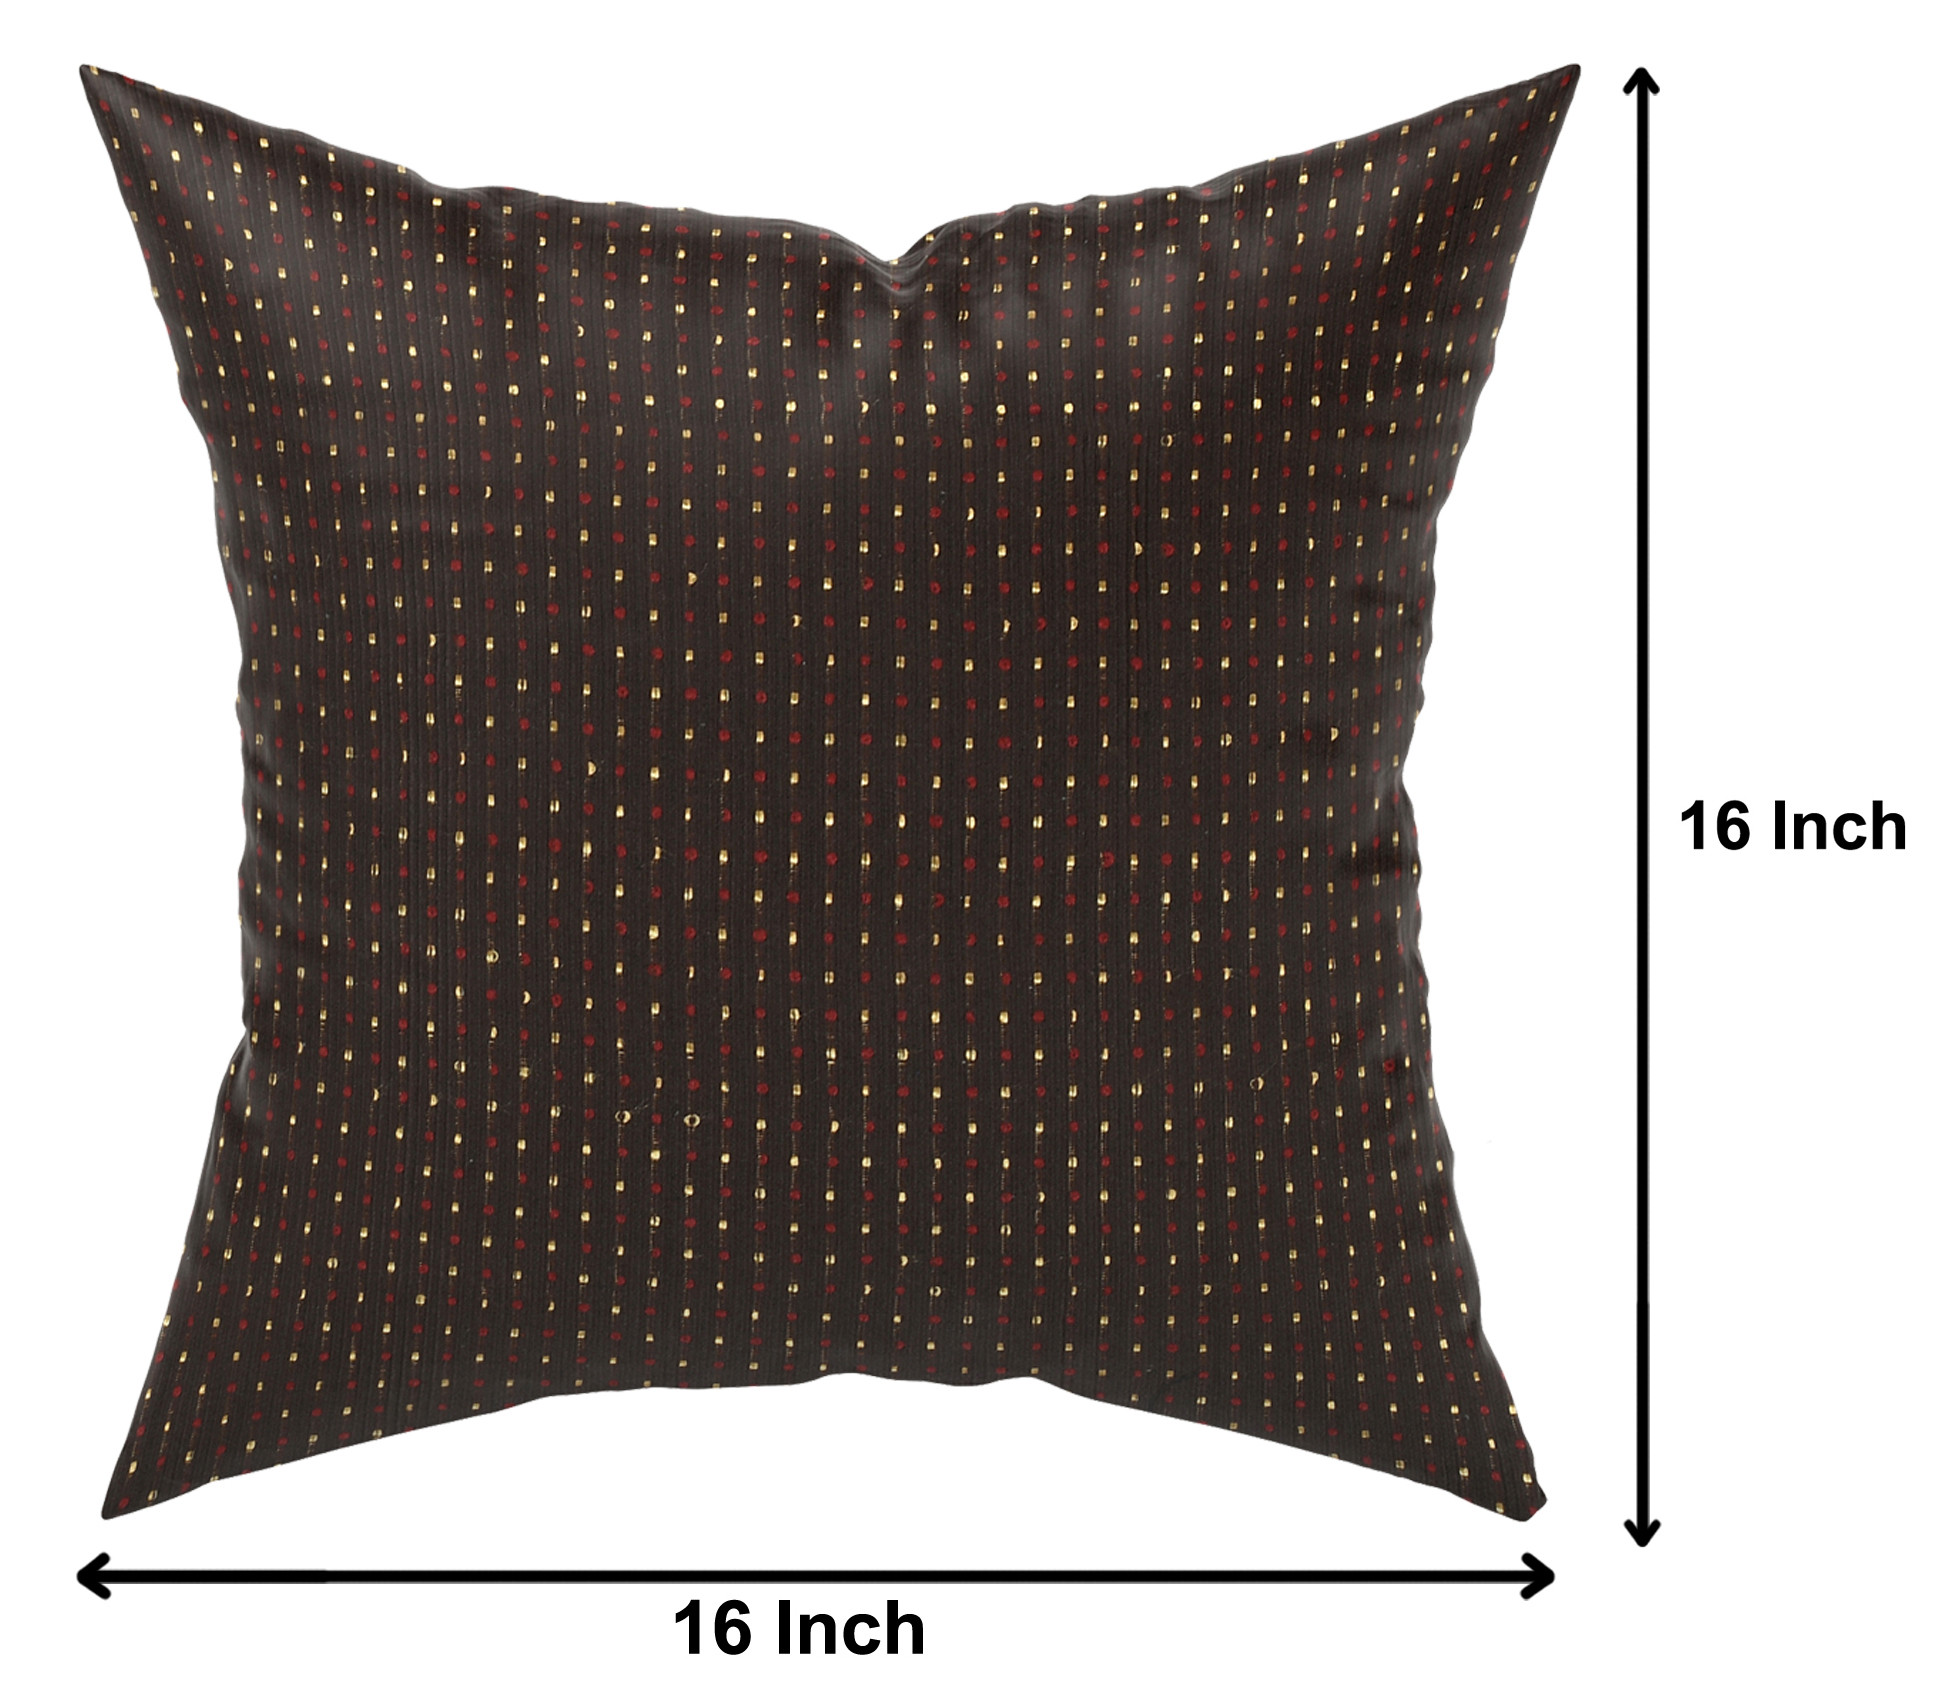 Kuber Industries Velvet Dot Printed Soft Decorative Square Throw Pillow Cover, Cushion Covers, Pillow Case For Sofa Couch Bed Chair 16x16 Inch-(Brown)